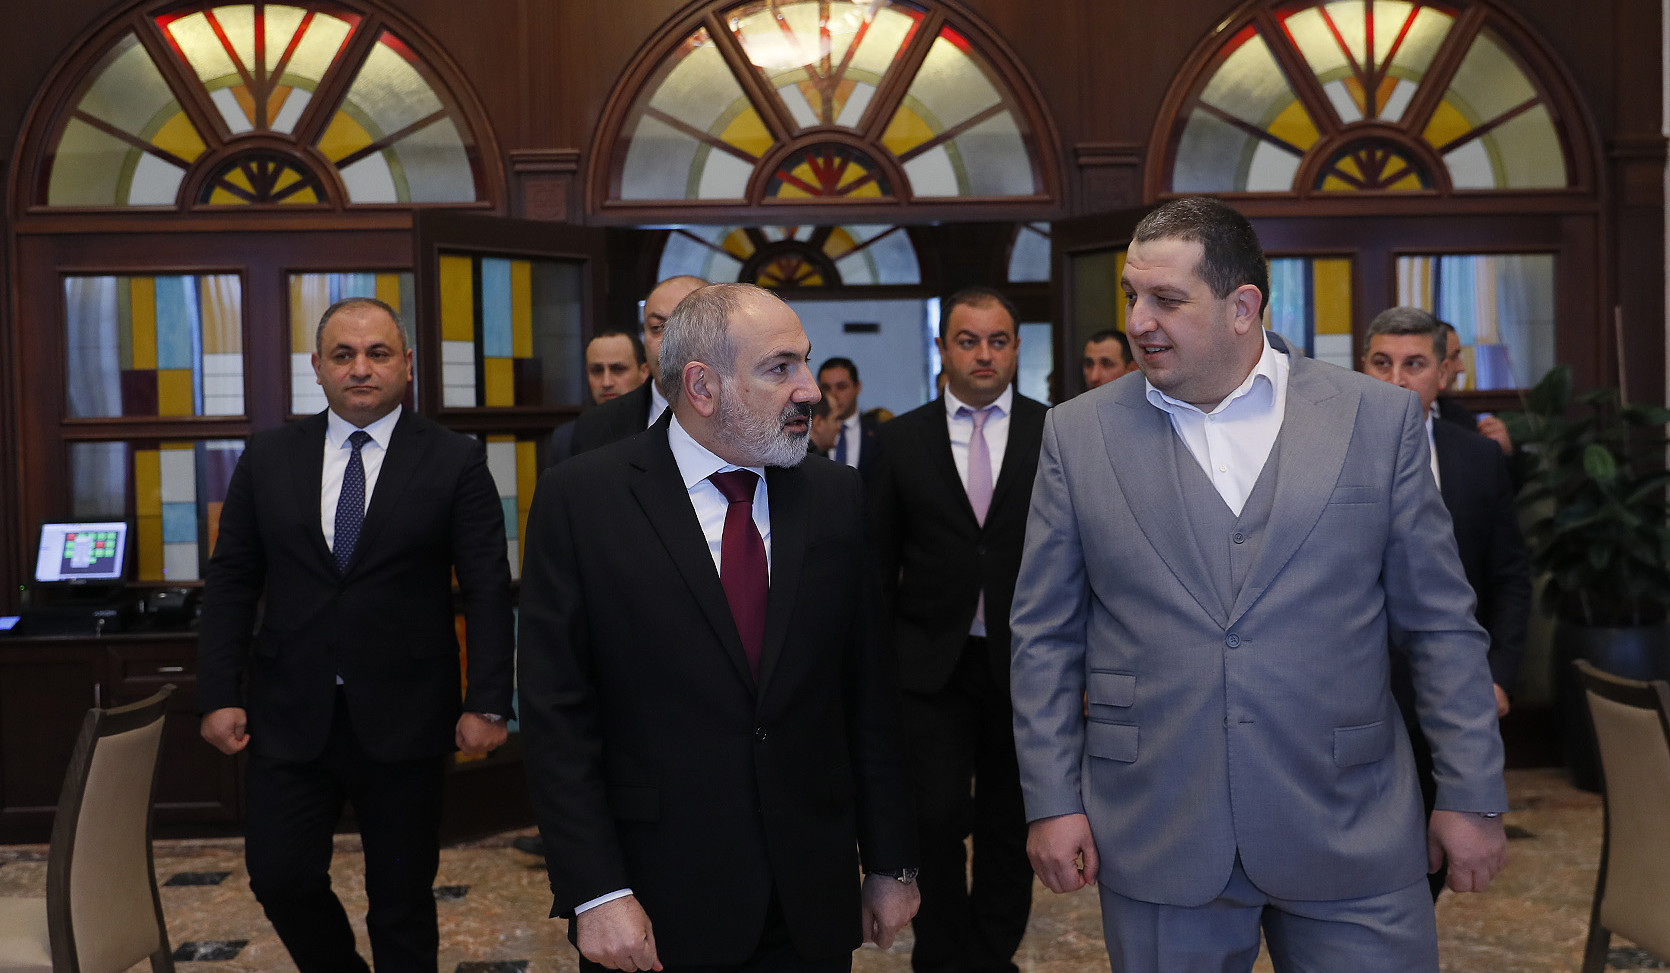 Prime Minister attends opening ceremony of Eighty Eight Hotel & Spa hotel complex in Tsaghkadzor